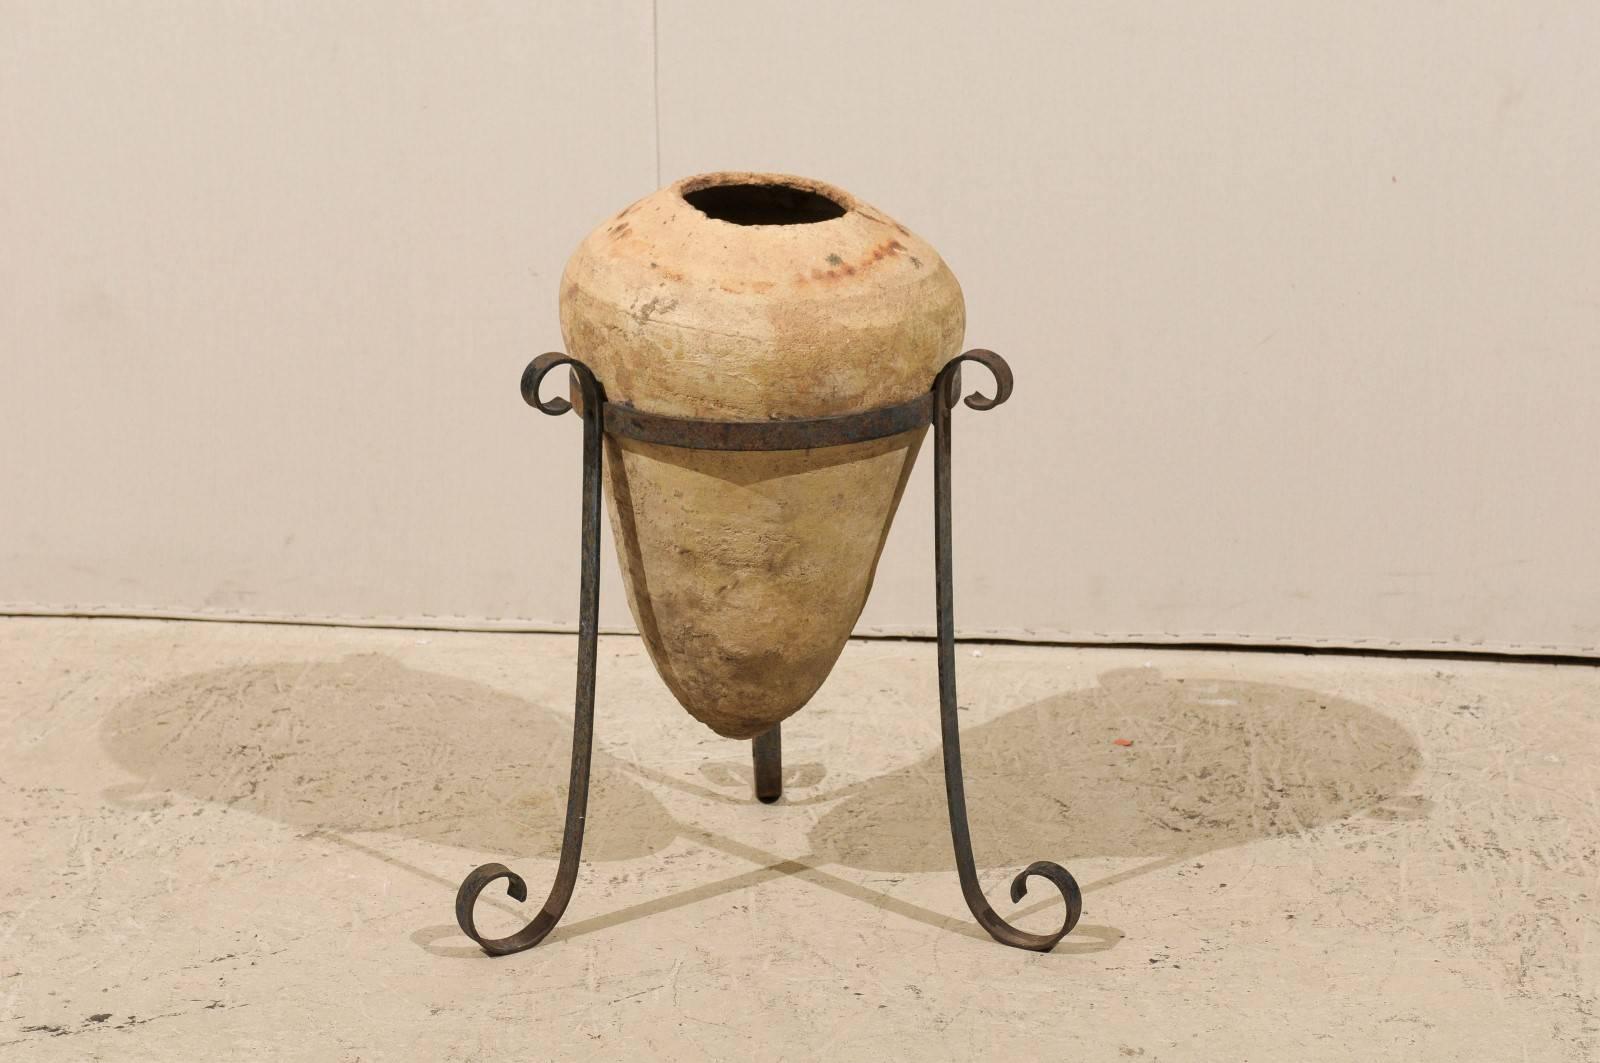 A clay Spanish colonial period jar from the 18th century. This jar is raised on a tripod custom-made metal stand. The finish is of a natural pale color.